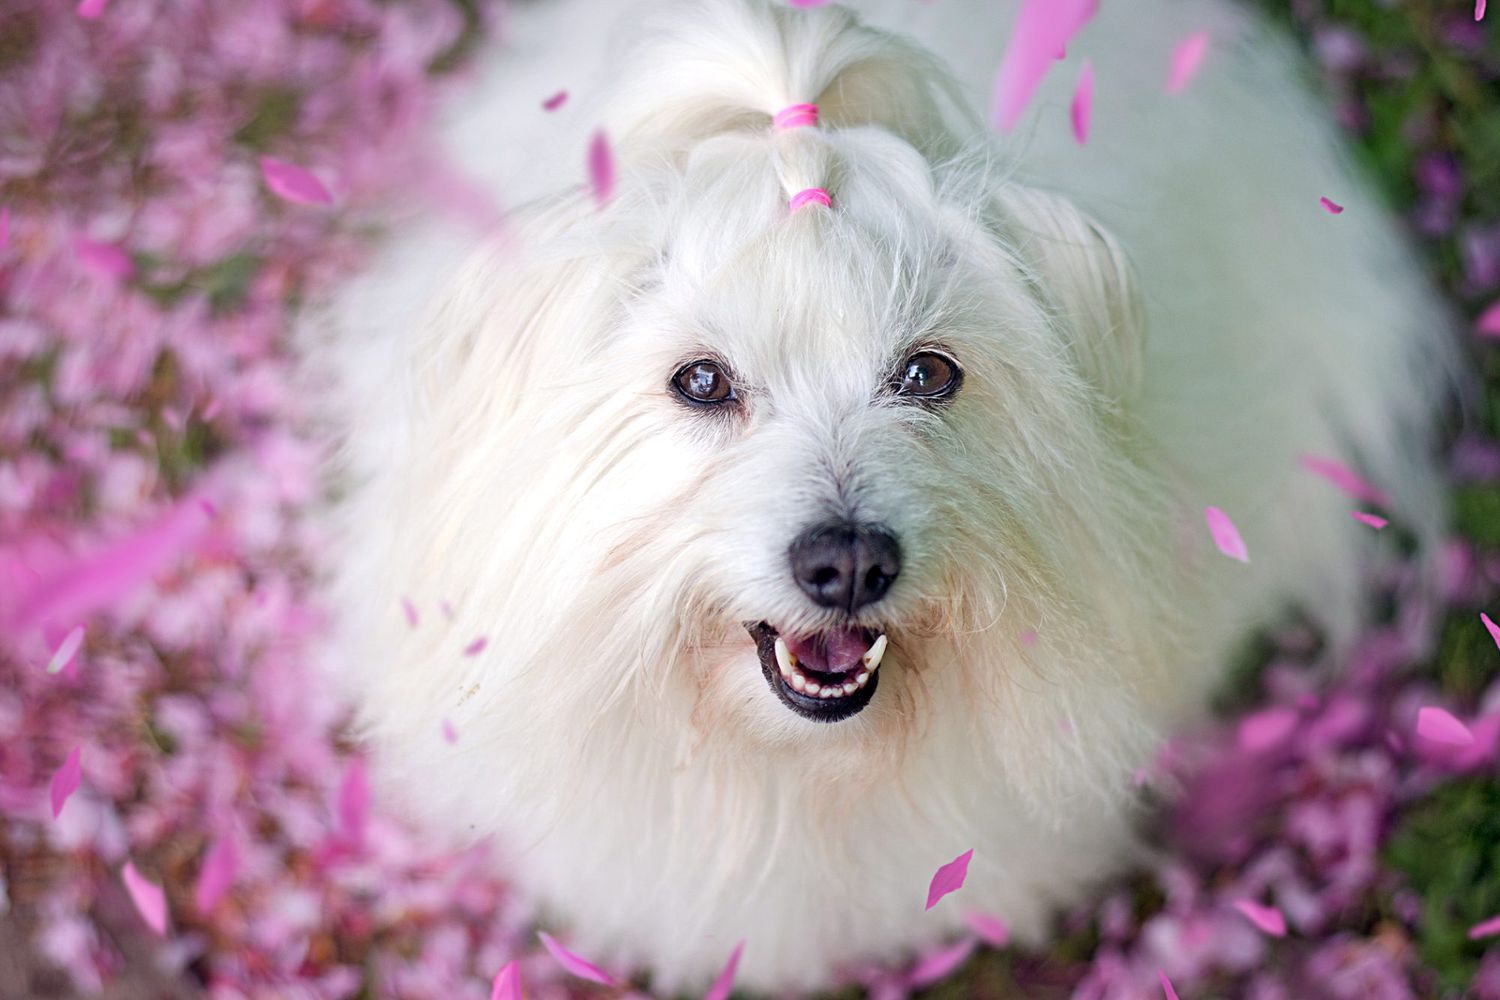 coton de tulear dog looking up smiling surrounded by falling pink flower petals